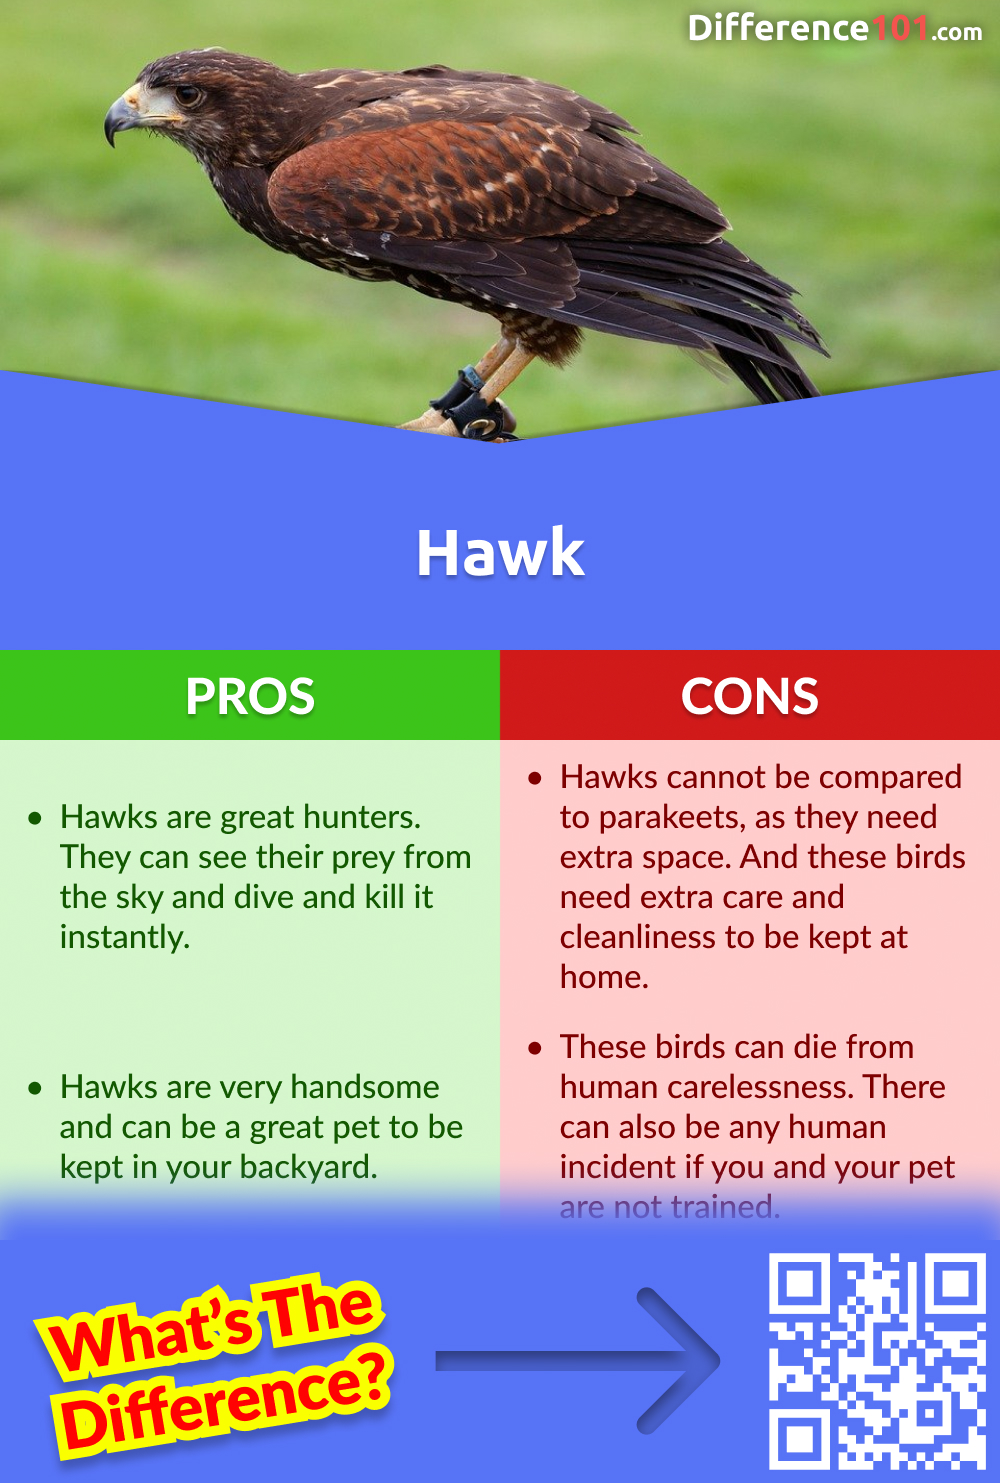 Hawk Pros and Cons